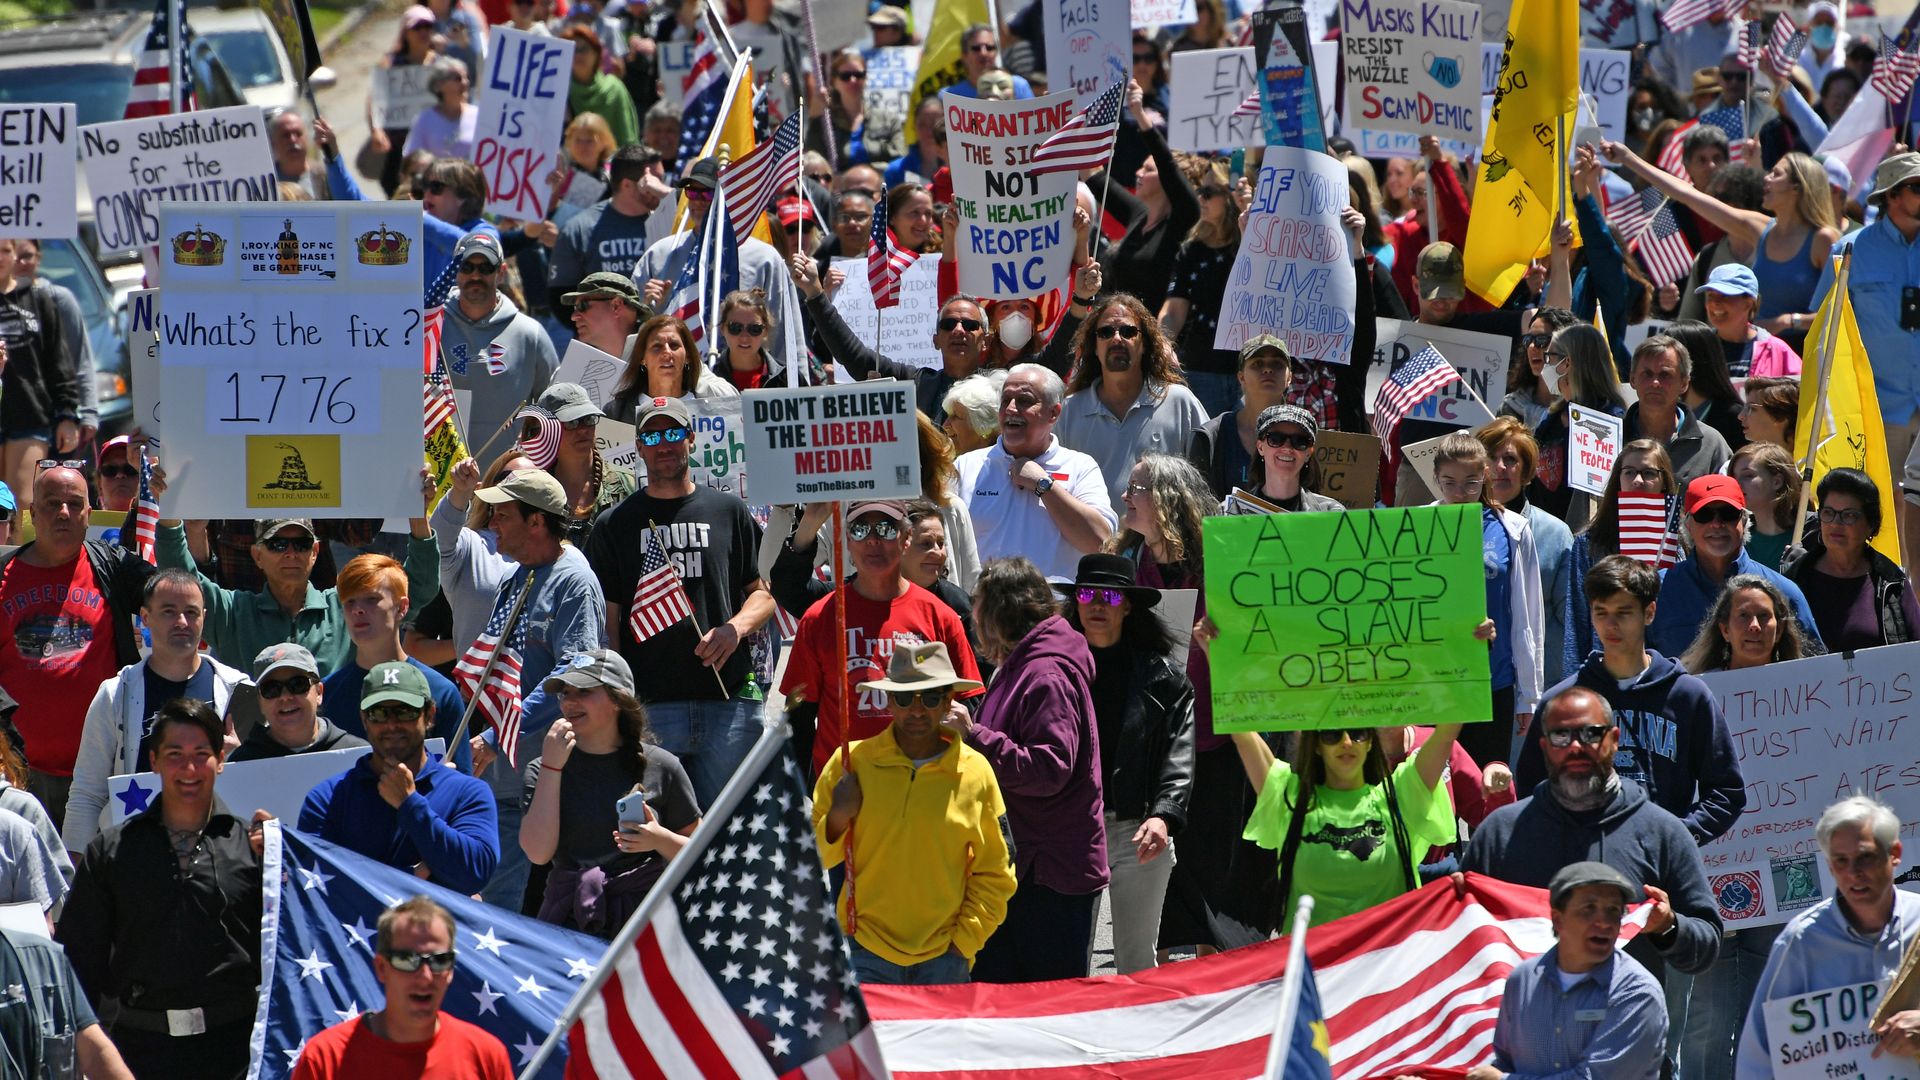 In this image, a large crowd of people hold flags and signs 